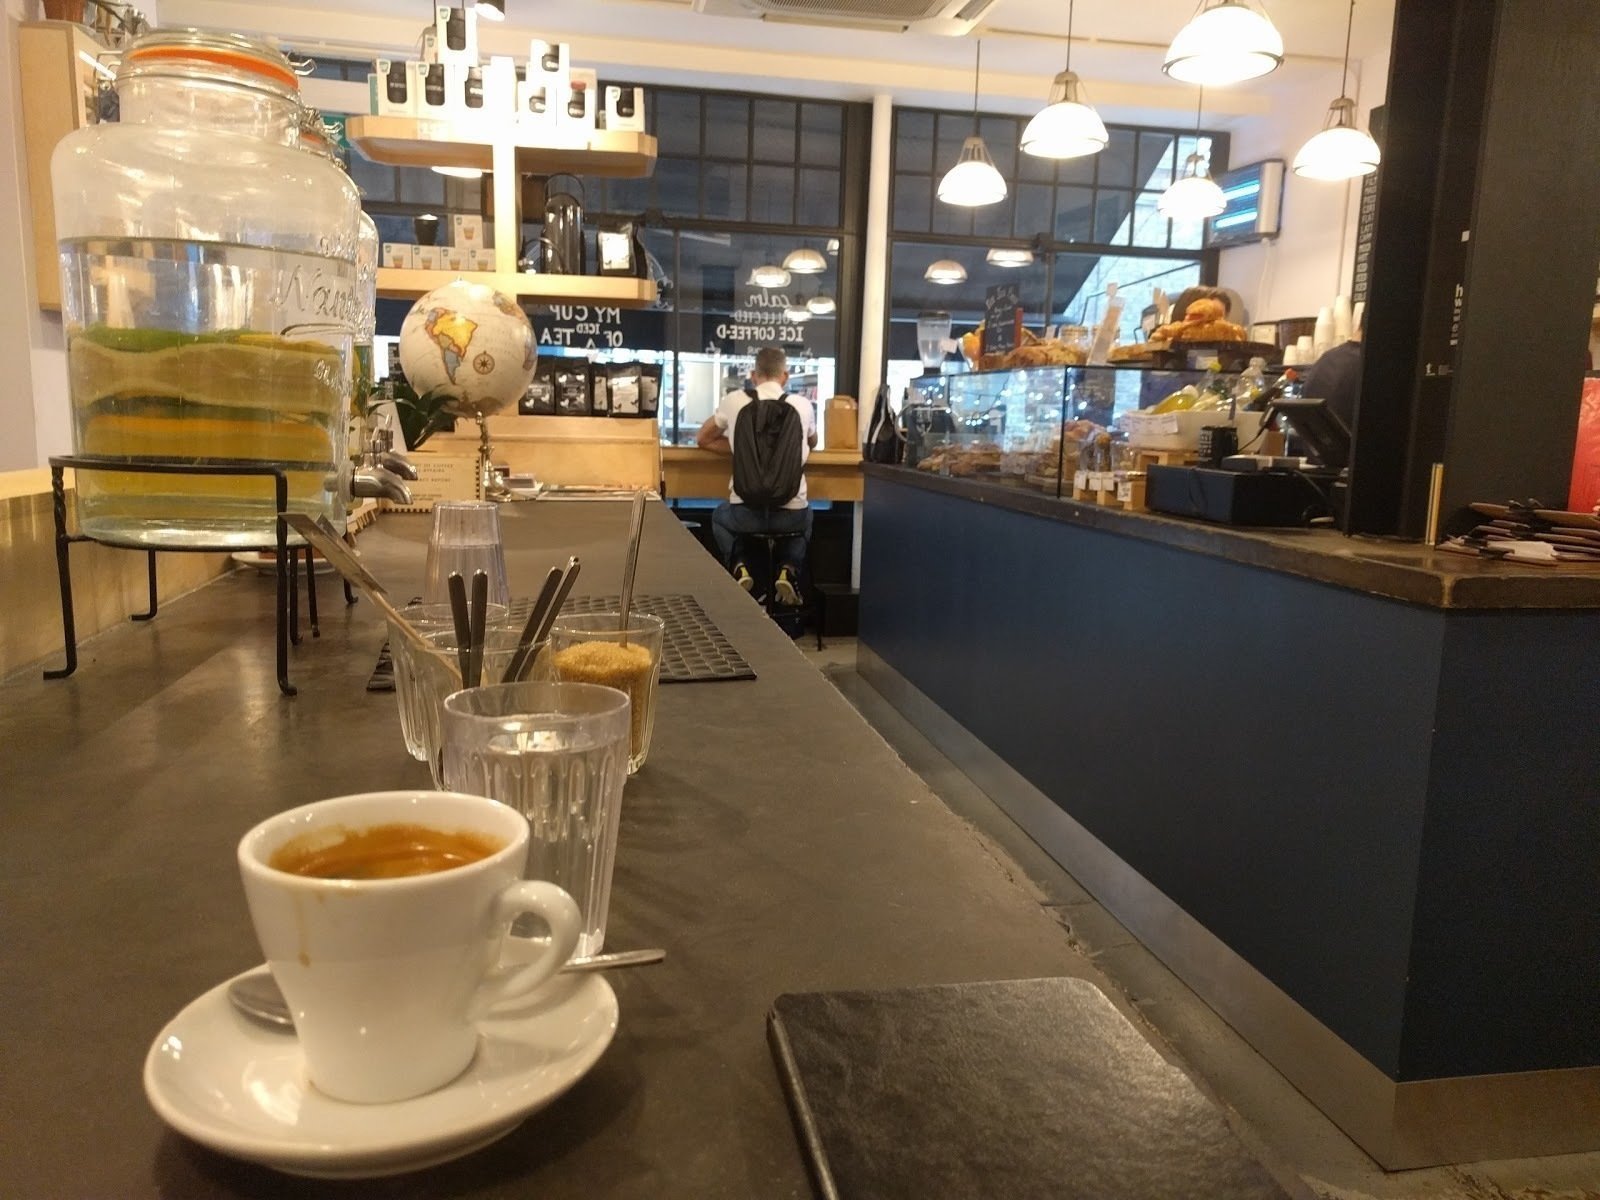 <span class="translation_missing" title="translation missing: en.meta.location_title, location_name: Department of Coffee and Social Affairs, city: London">Location Title</span>